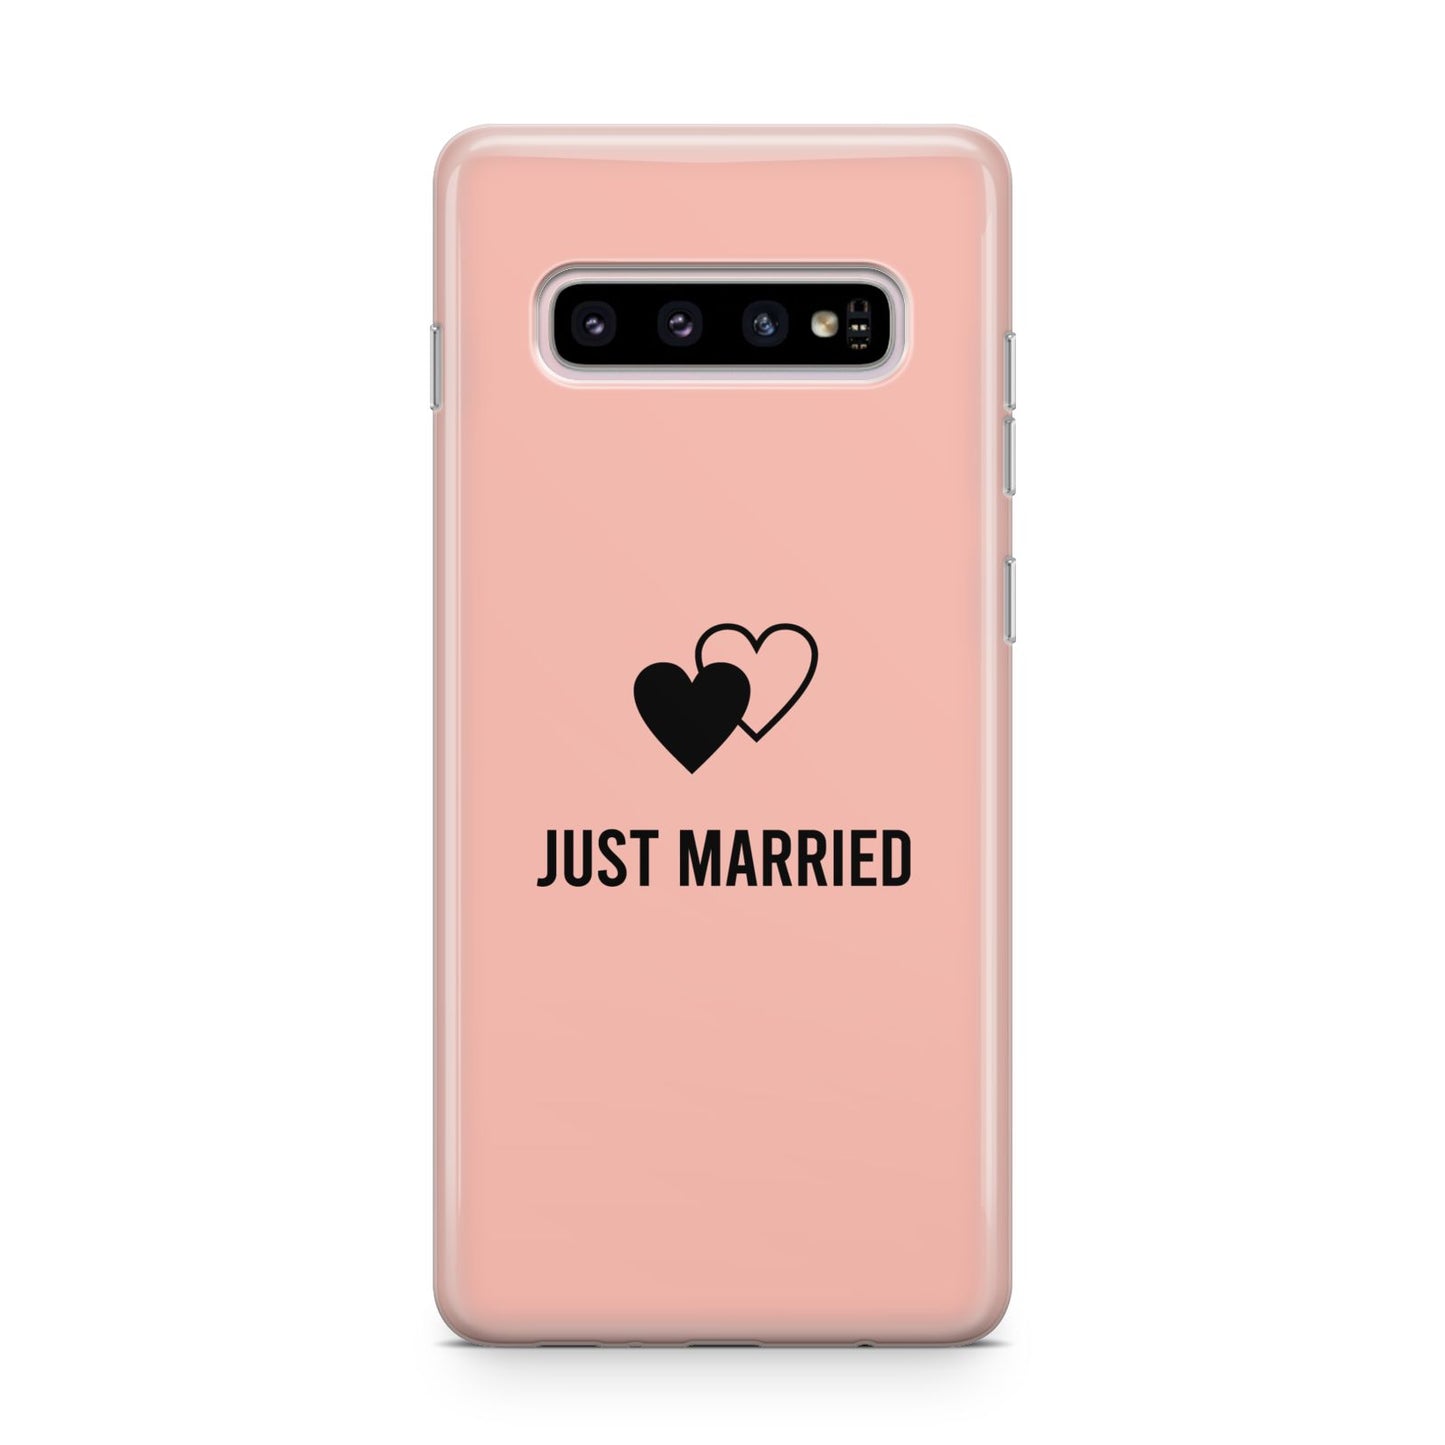 Just Married Samsung Galaxy S10 Plus Case